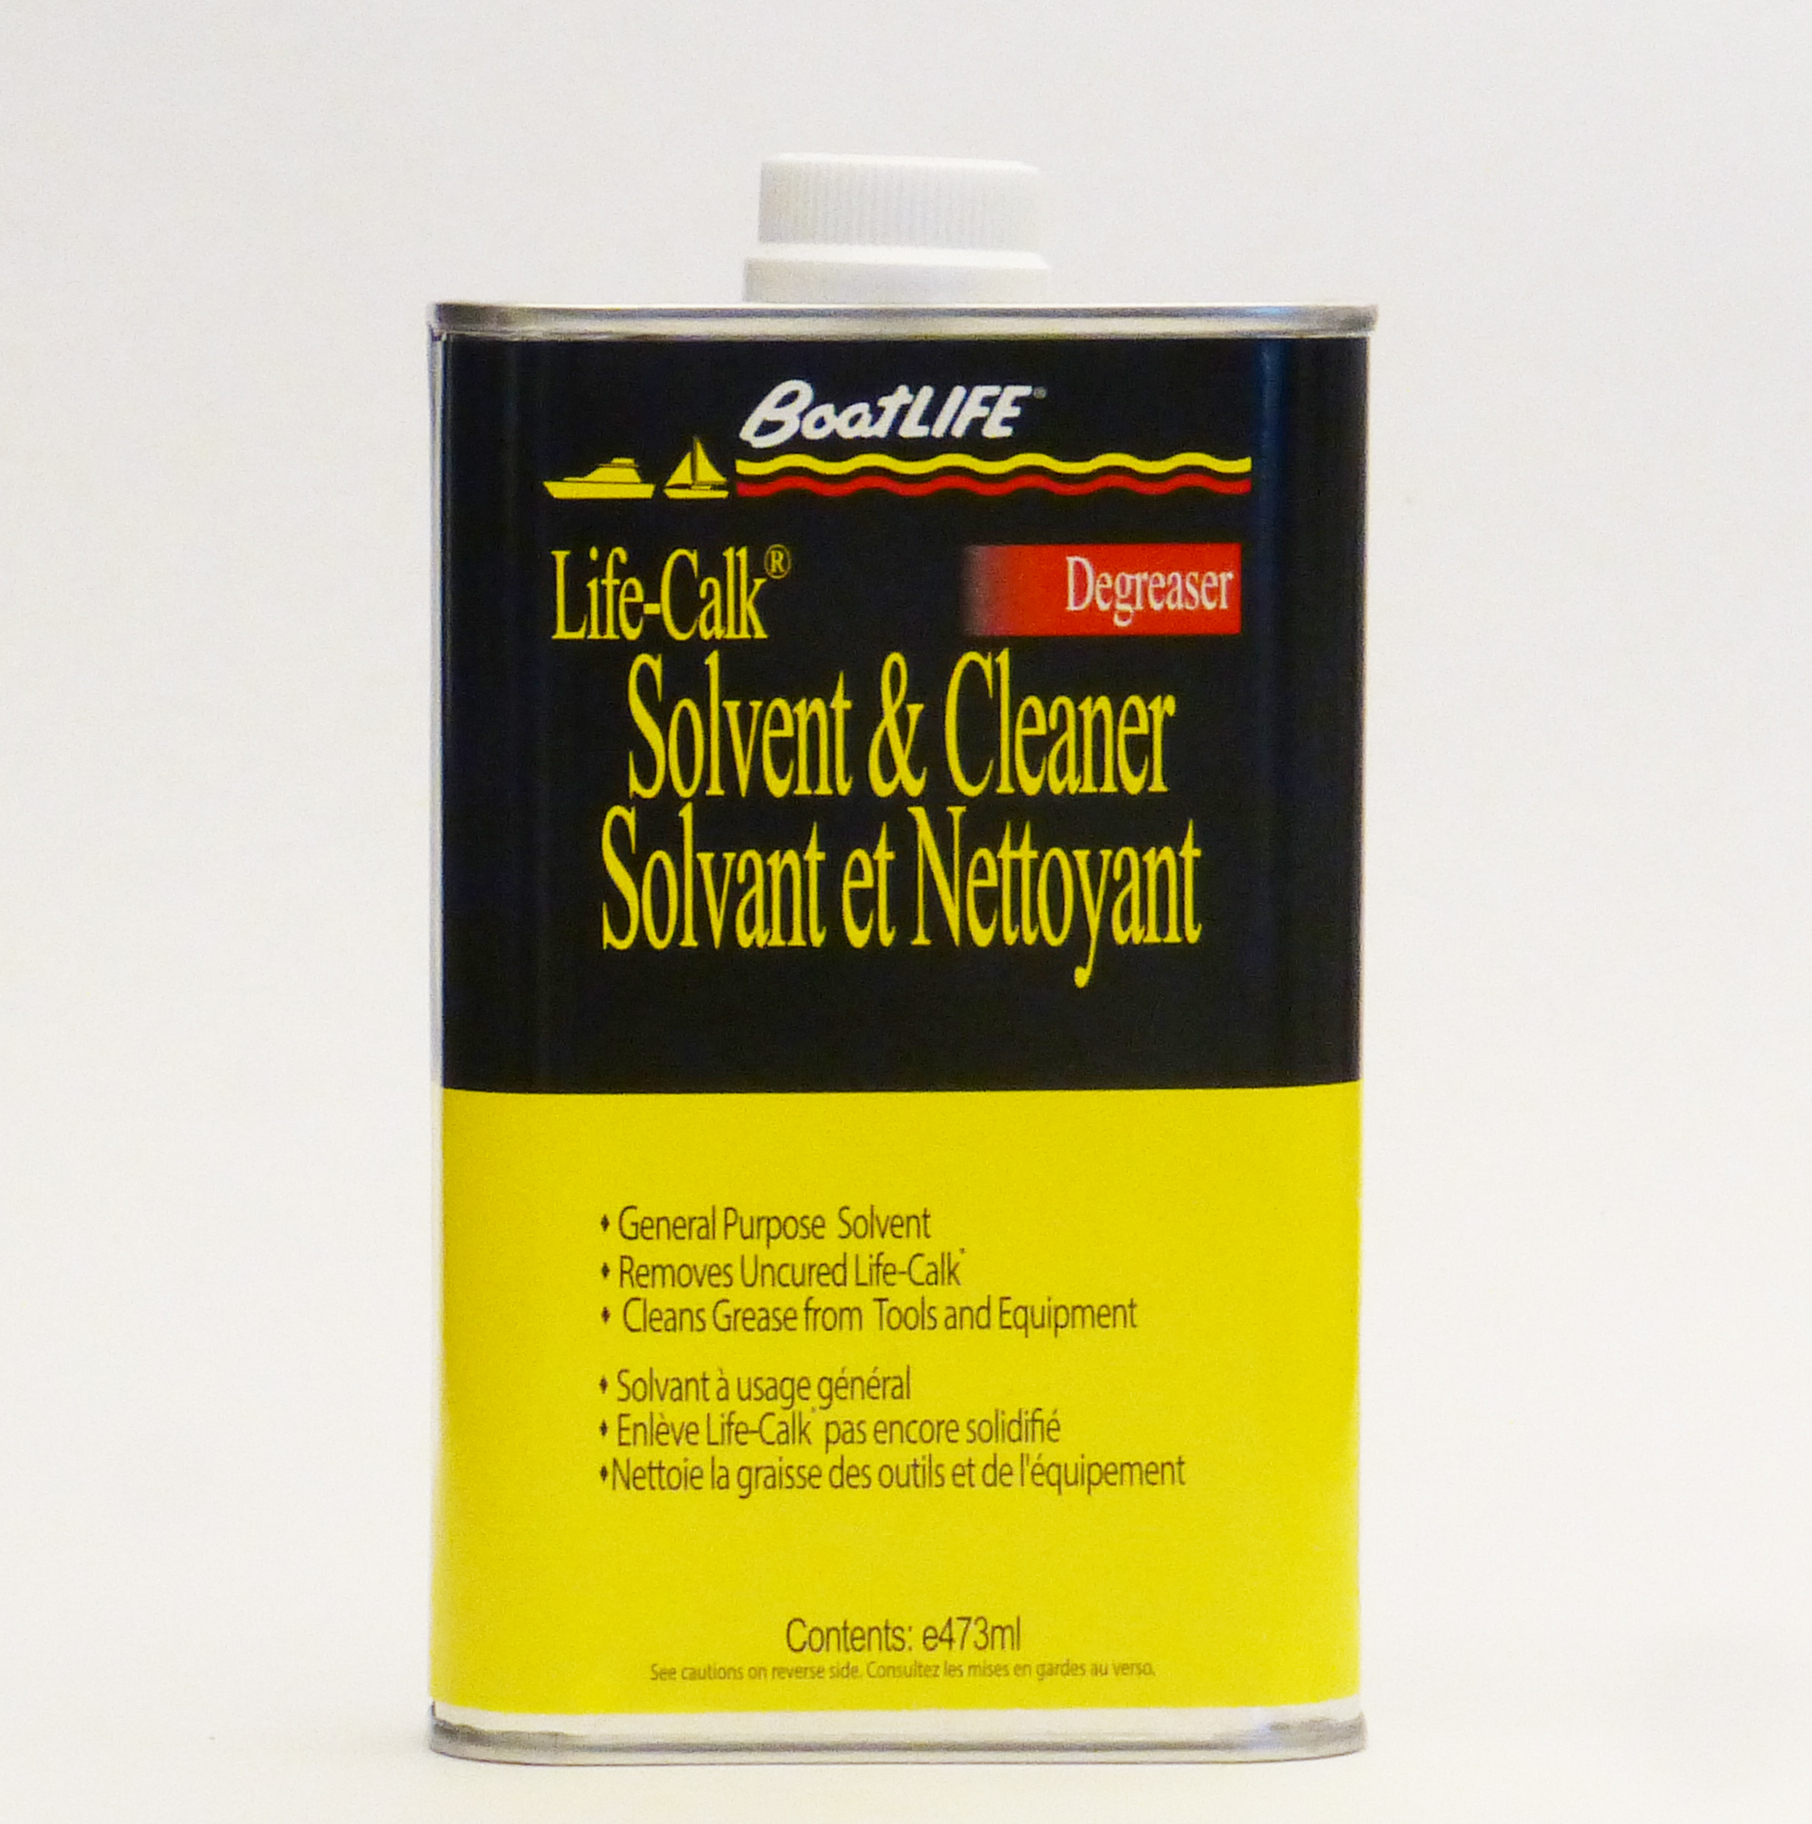 Solvent & Cleaner canister